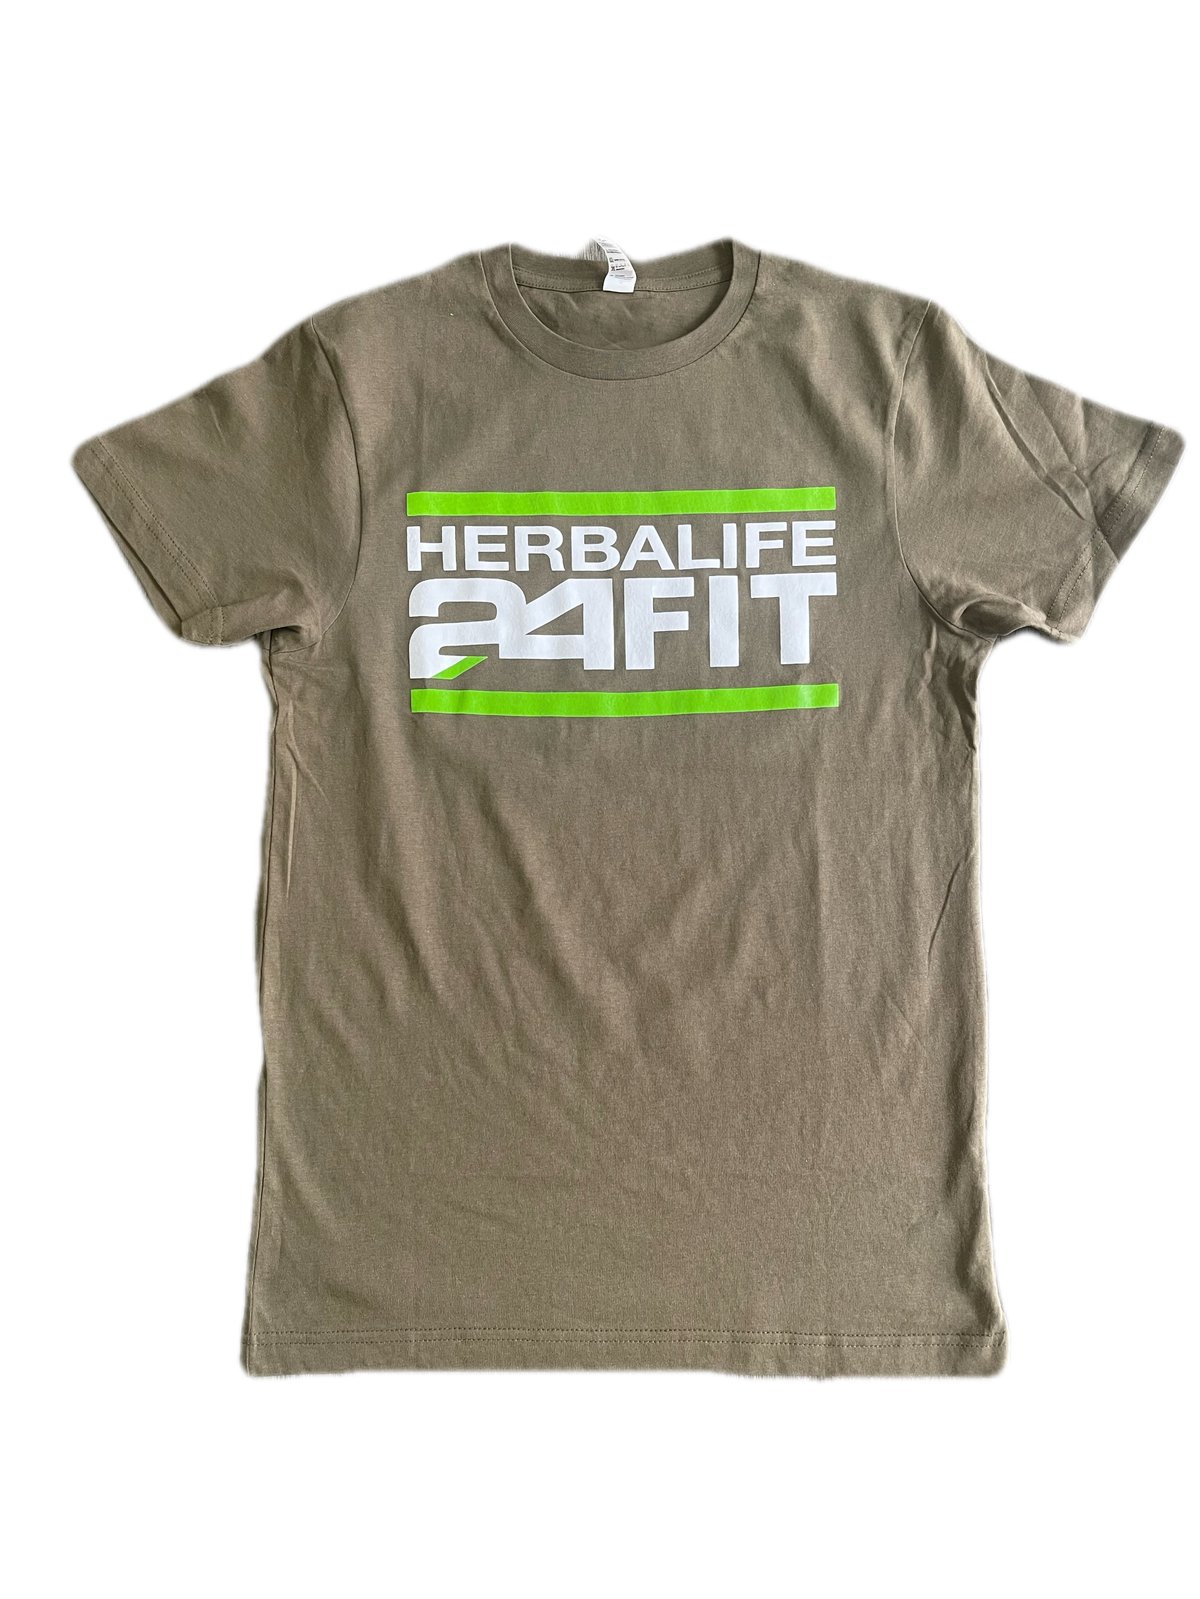 Image of Herbalife 24 fit Charcoal green